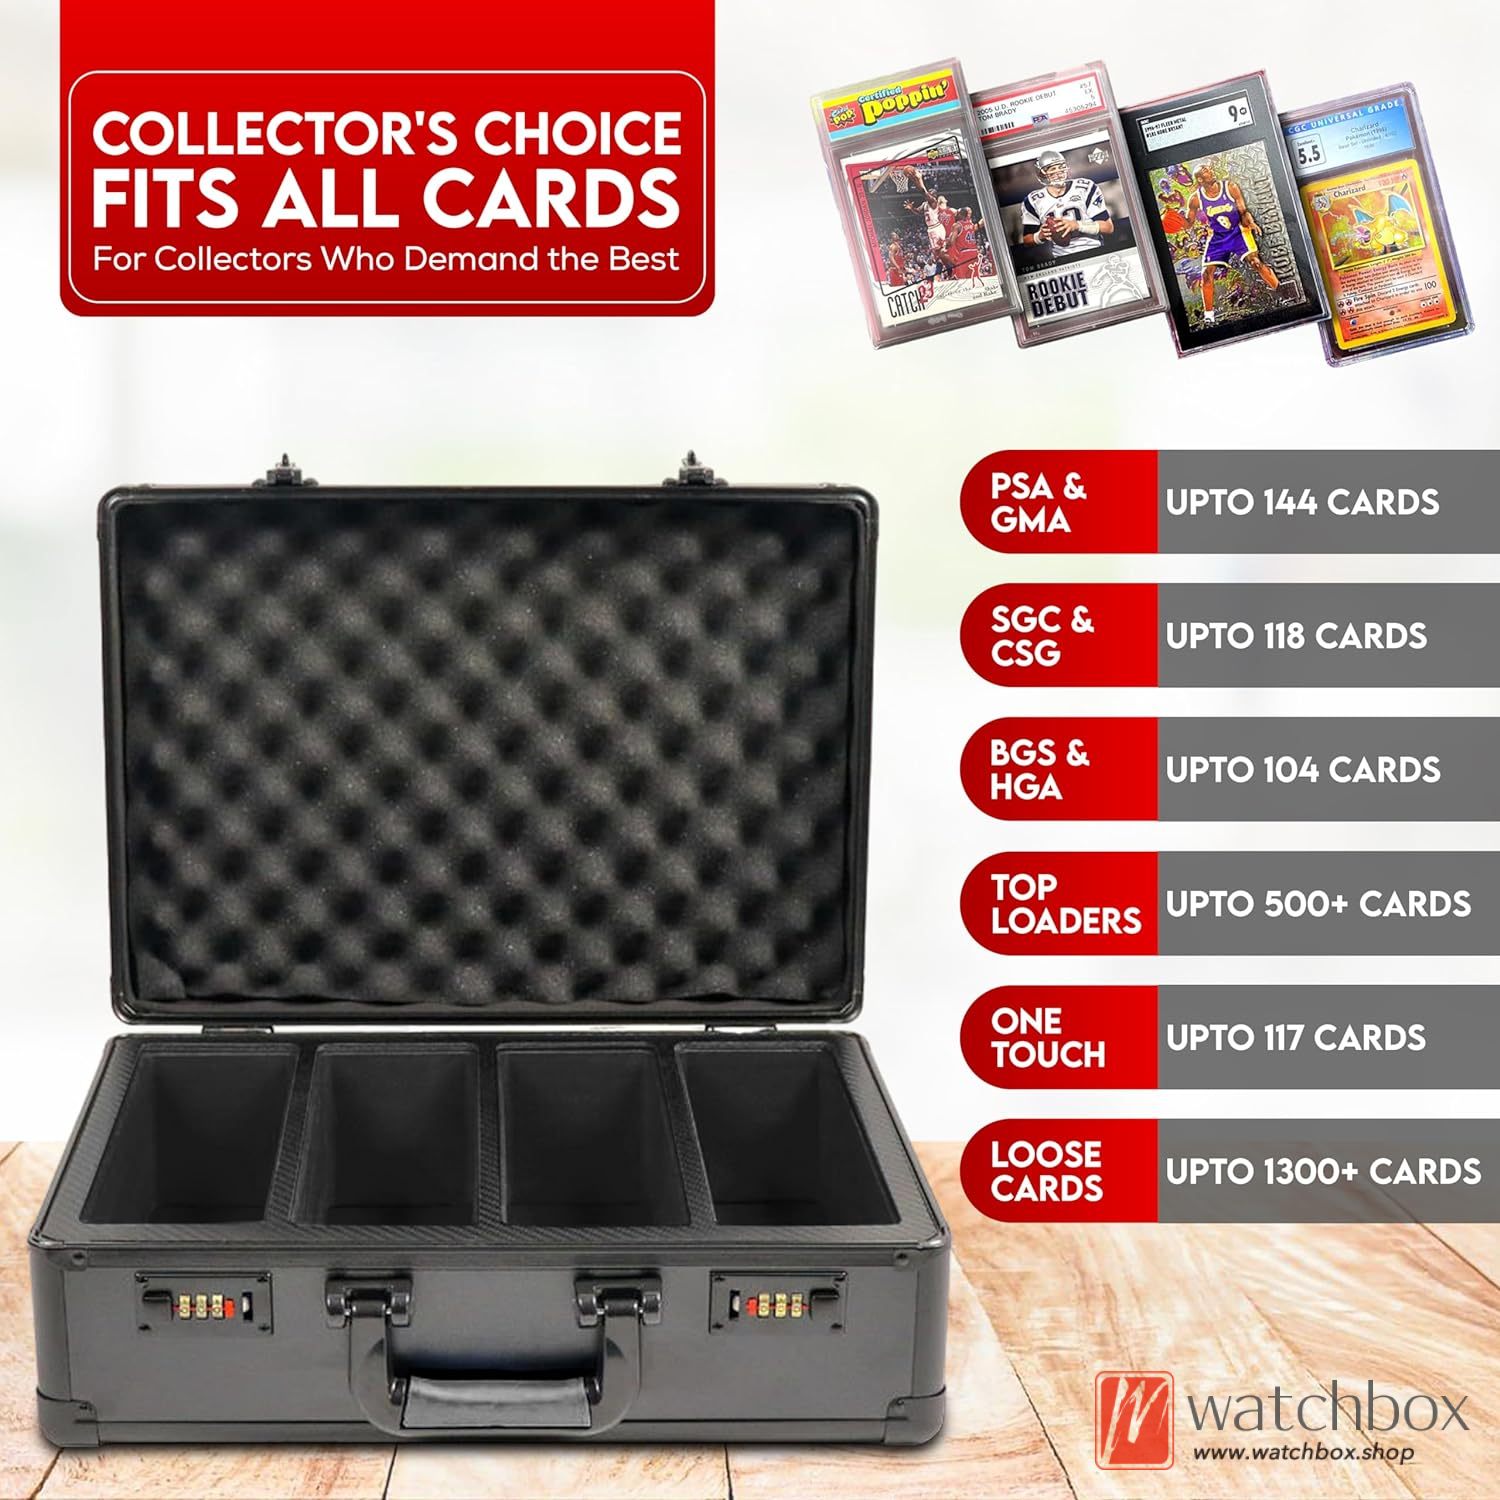 3/4/5 Row Slab Case Graded Card Aluminum alloy Storage Box Suitcase, Holds 100+ Card Slabs, Fits PSA, CSG, BGS, SGC, Magnetic Card Holder